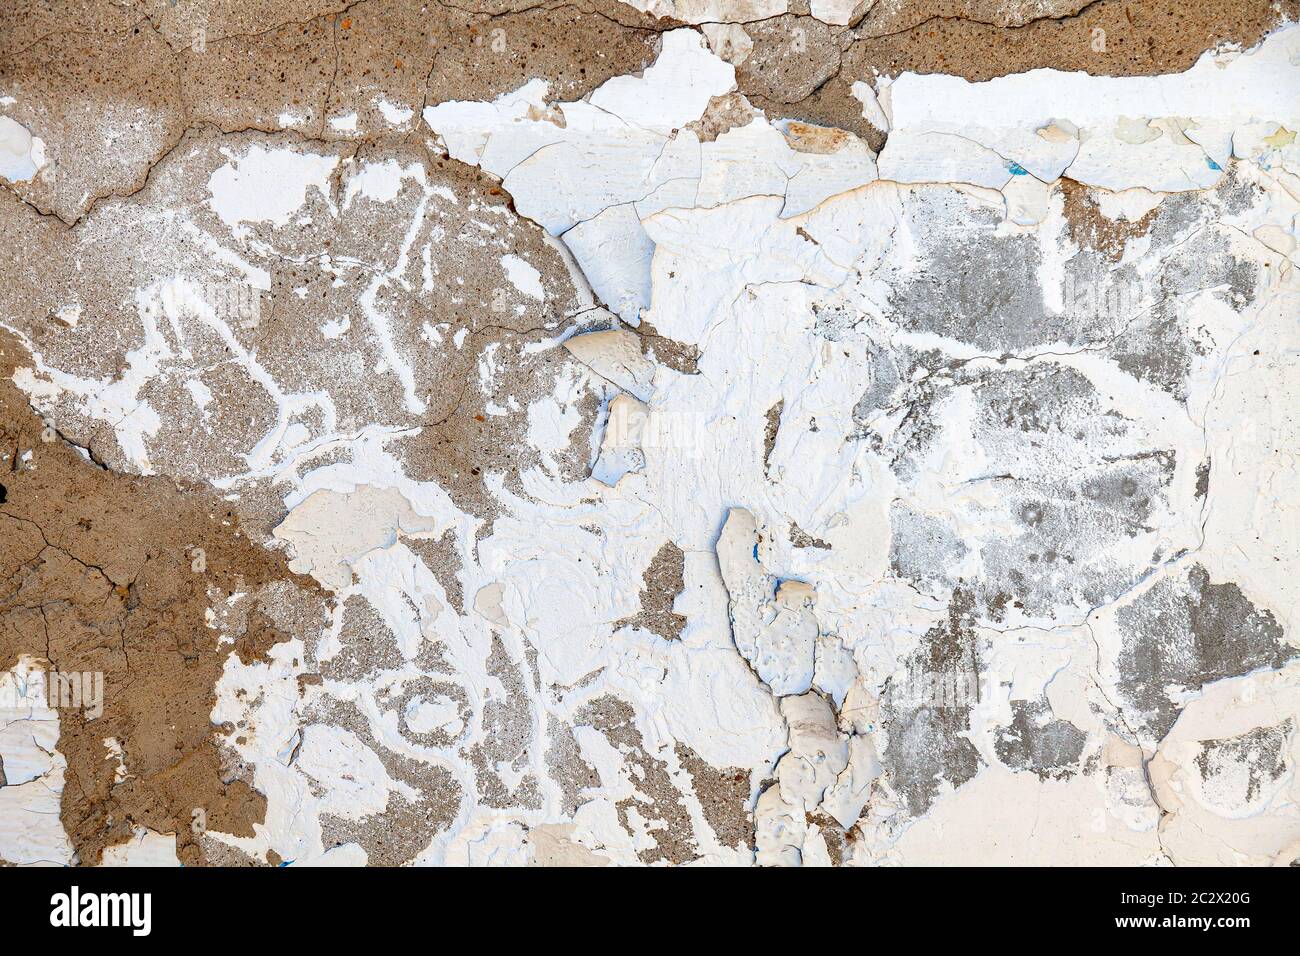 Cracked and crumbling plaster from a white wall - a wallpaper